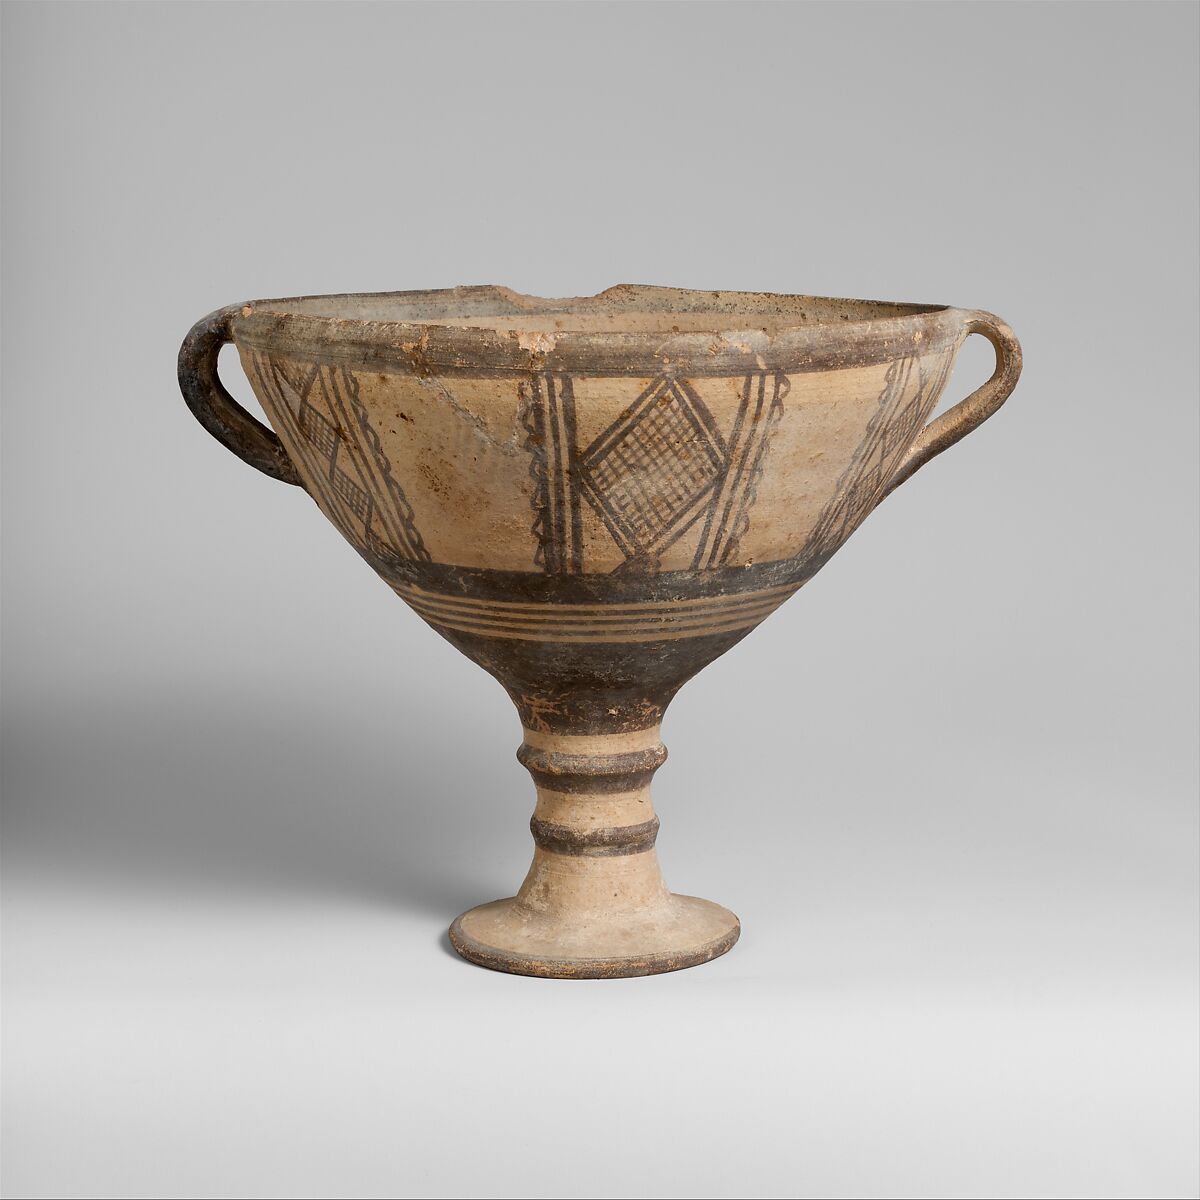 Terracotta stemmed cup, Terracotta, Cypriot 